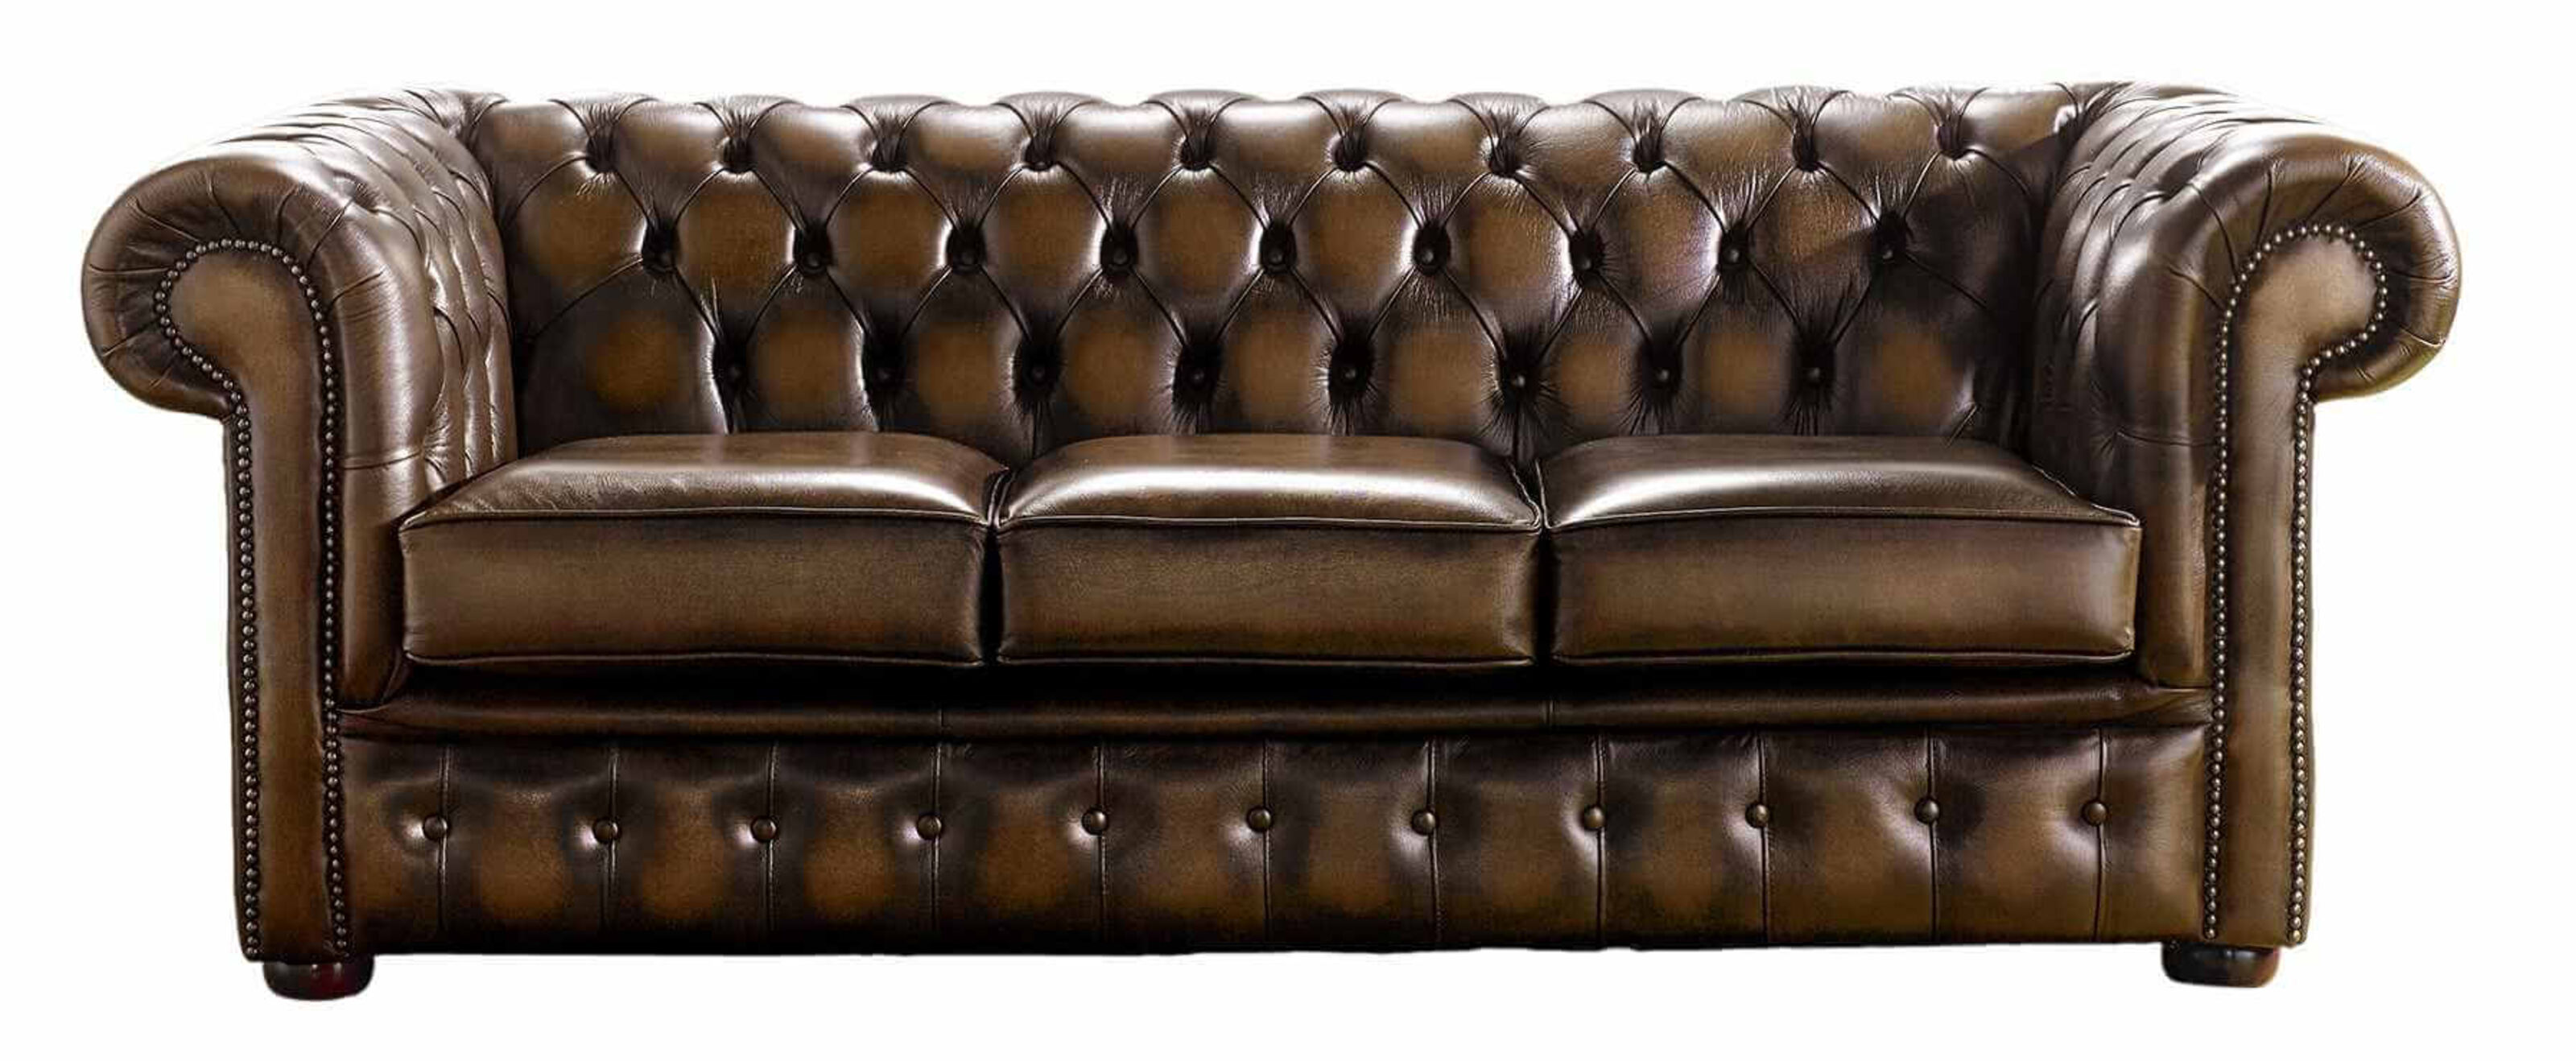 Why Chesterfield Furniture Never Goes Out of Style  %Post Title